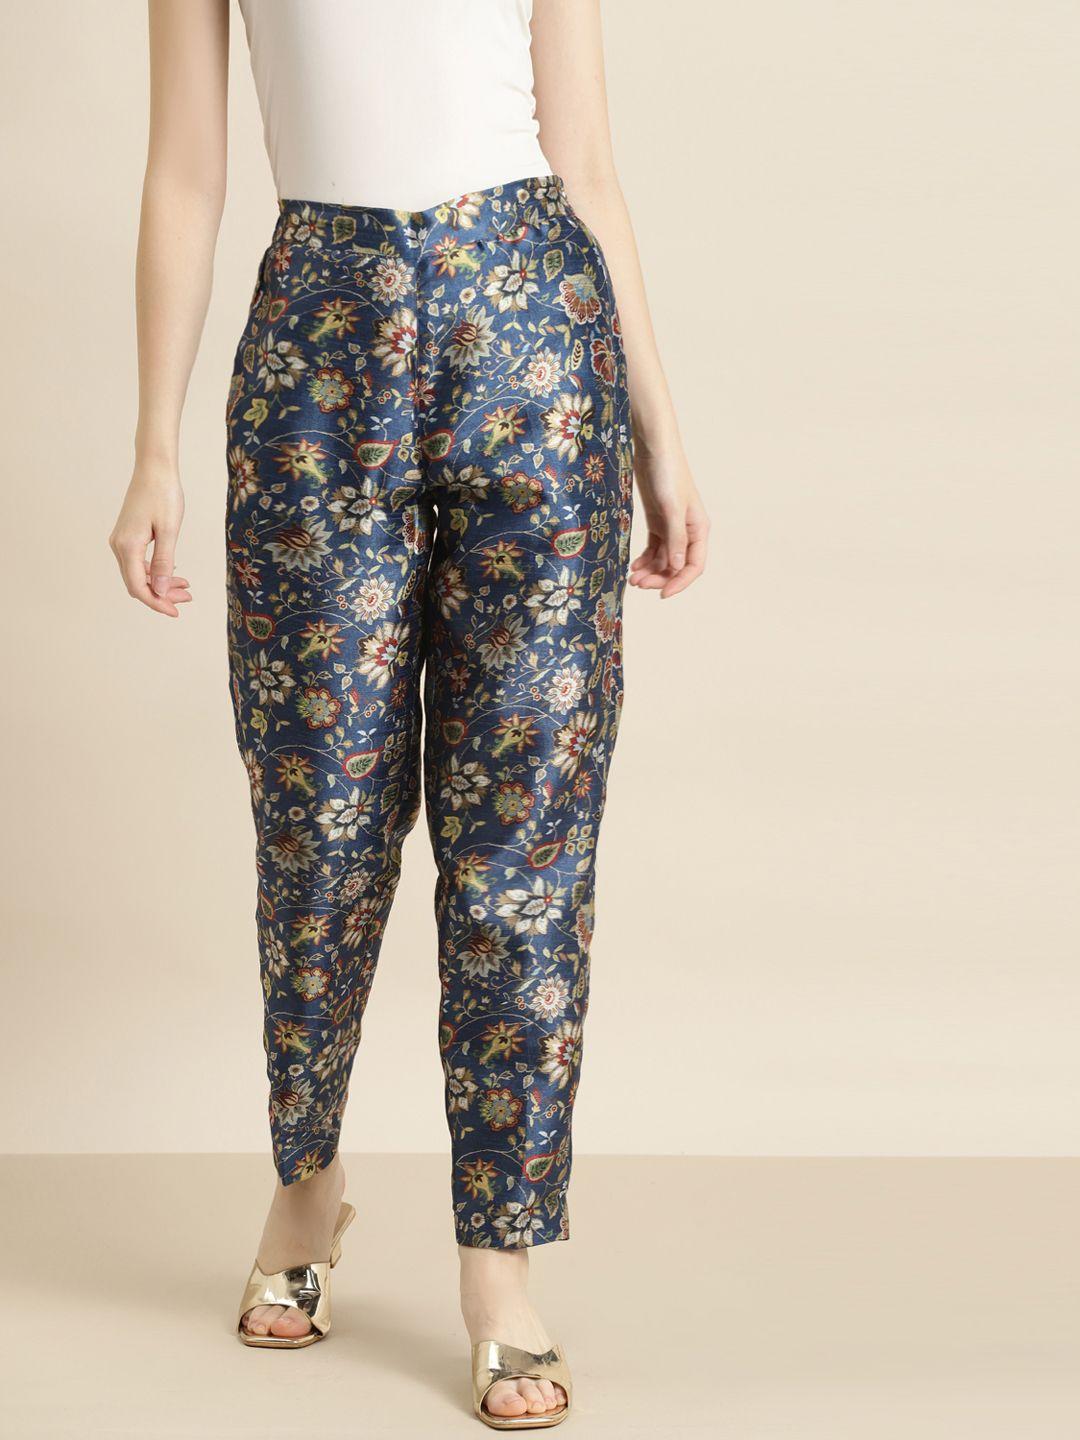 shae-by-sassafras-women-navy-blue-floral-printed-tapered-fit-trousers